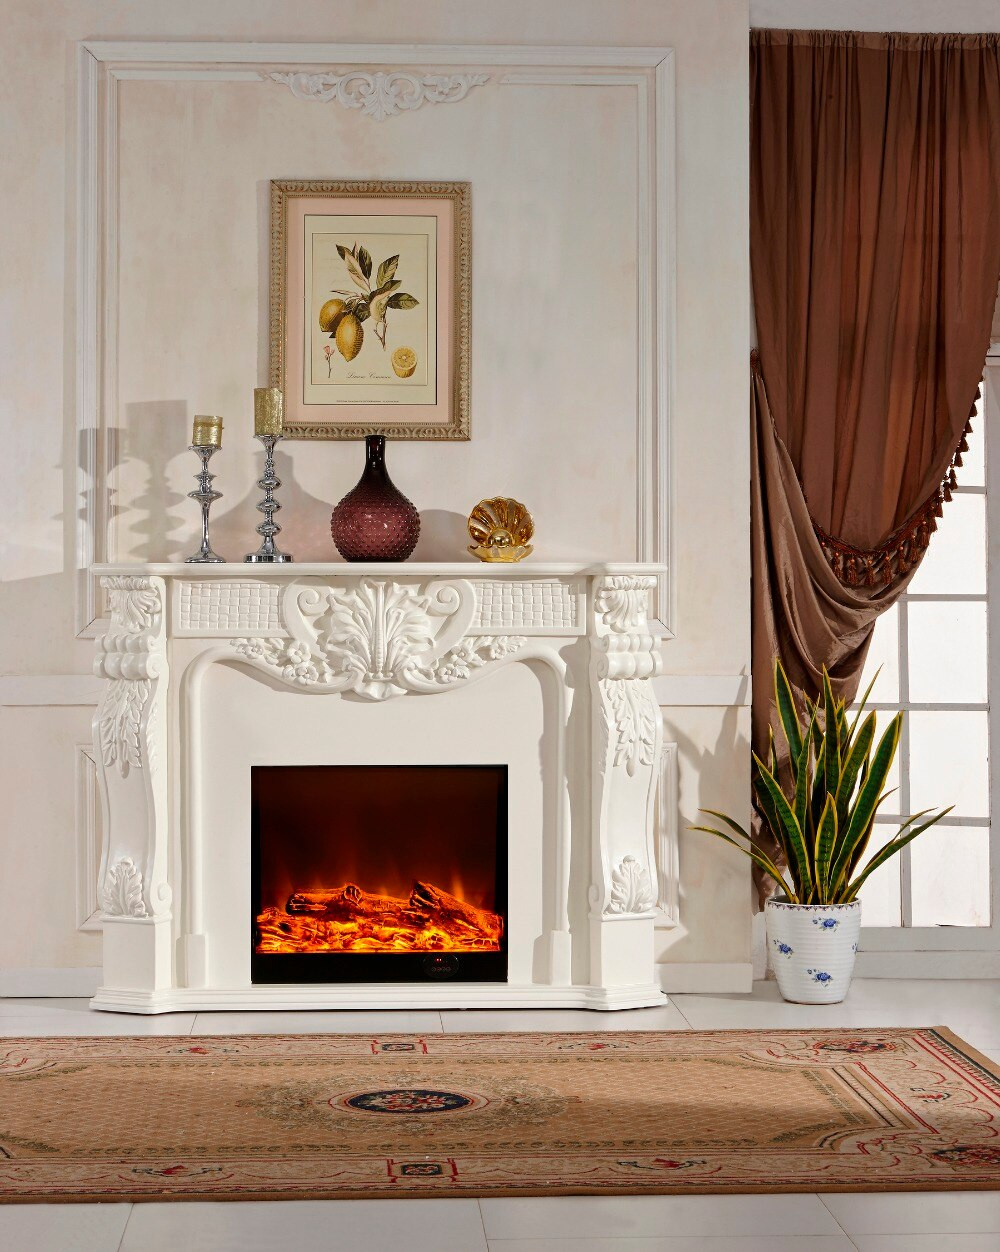 Decorative Electric Fireplace Best Of 8081 1500 330 1170 Mm Decorative Electric Fireplace and